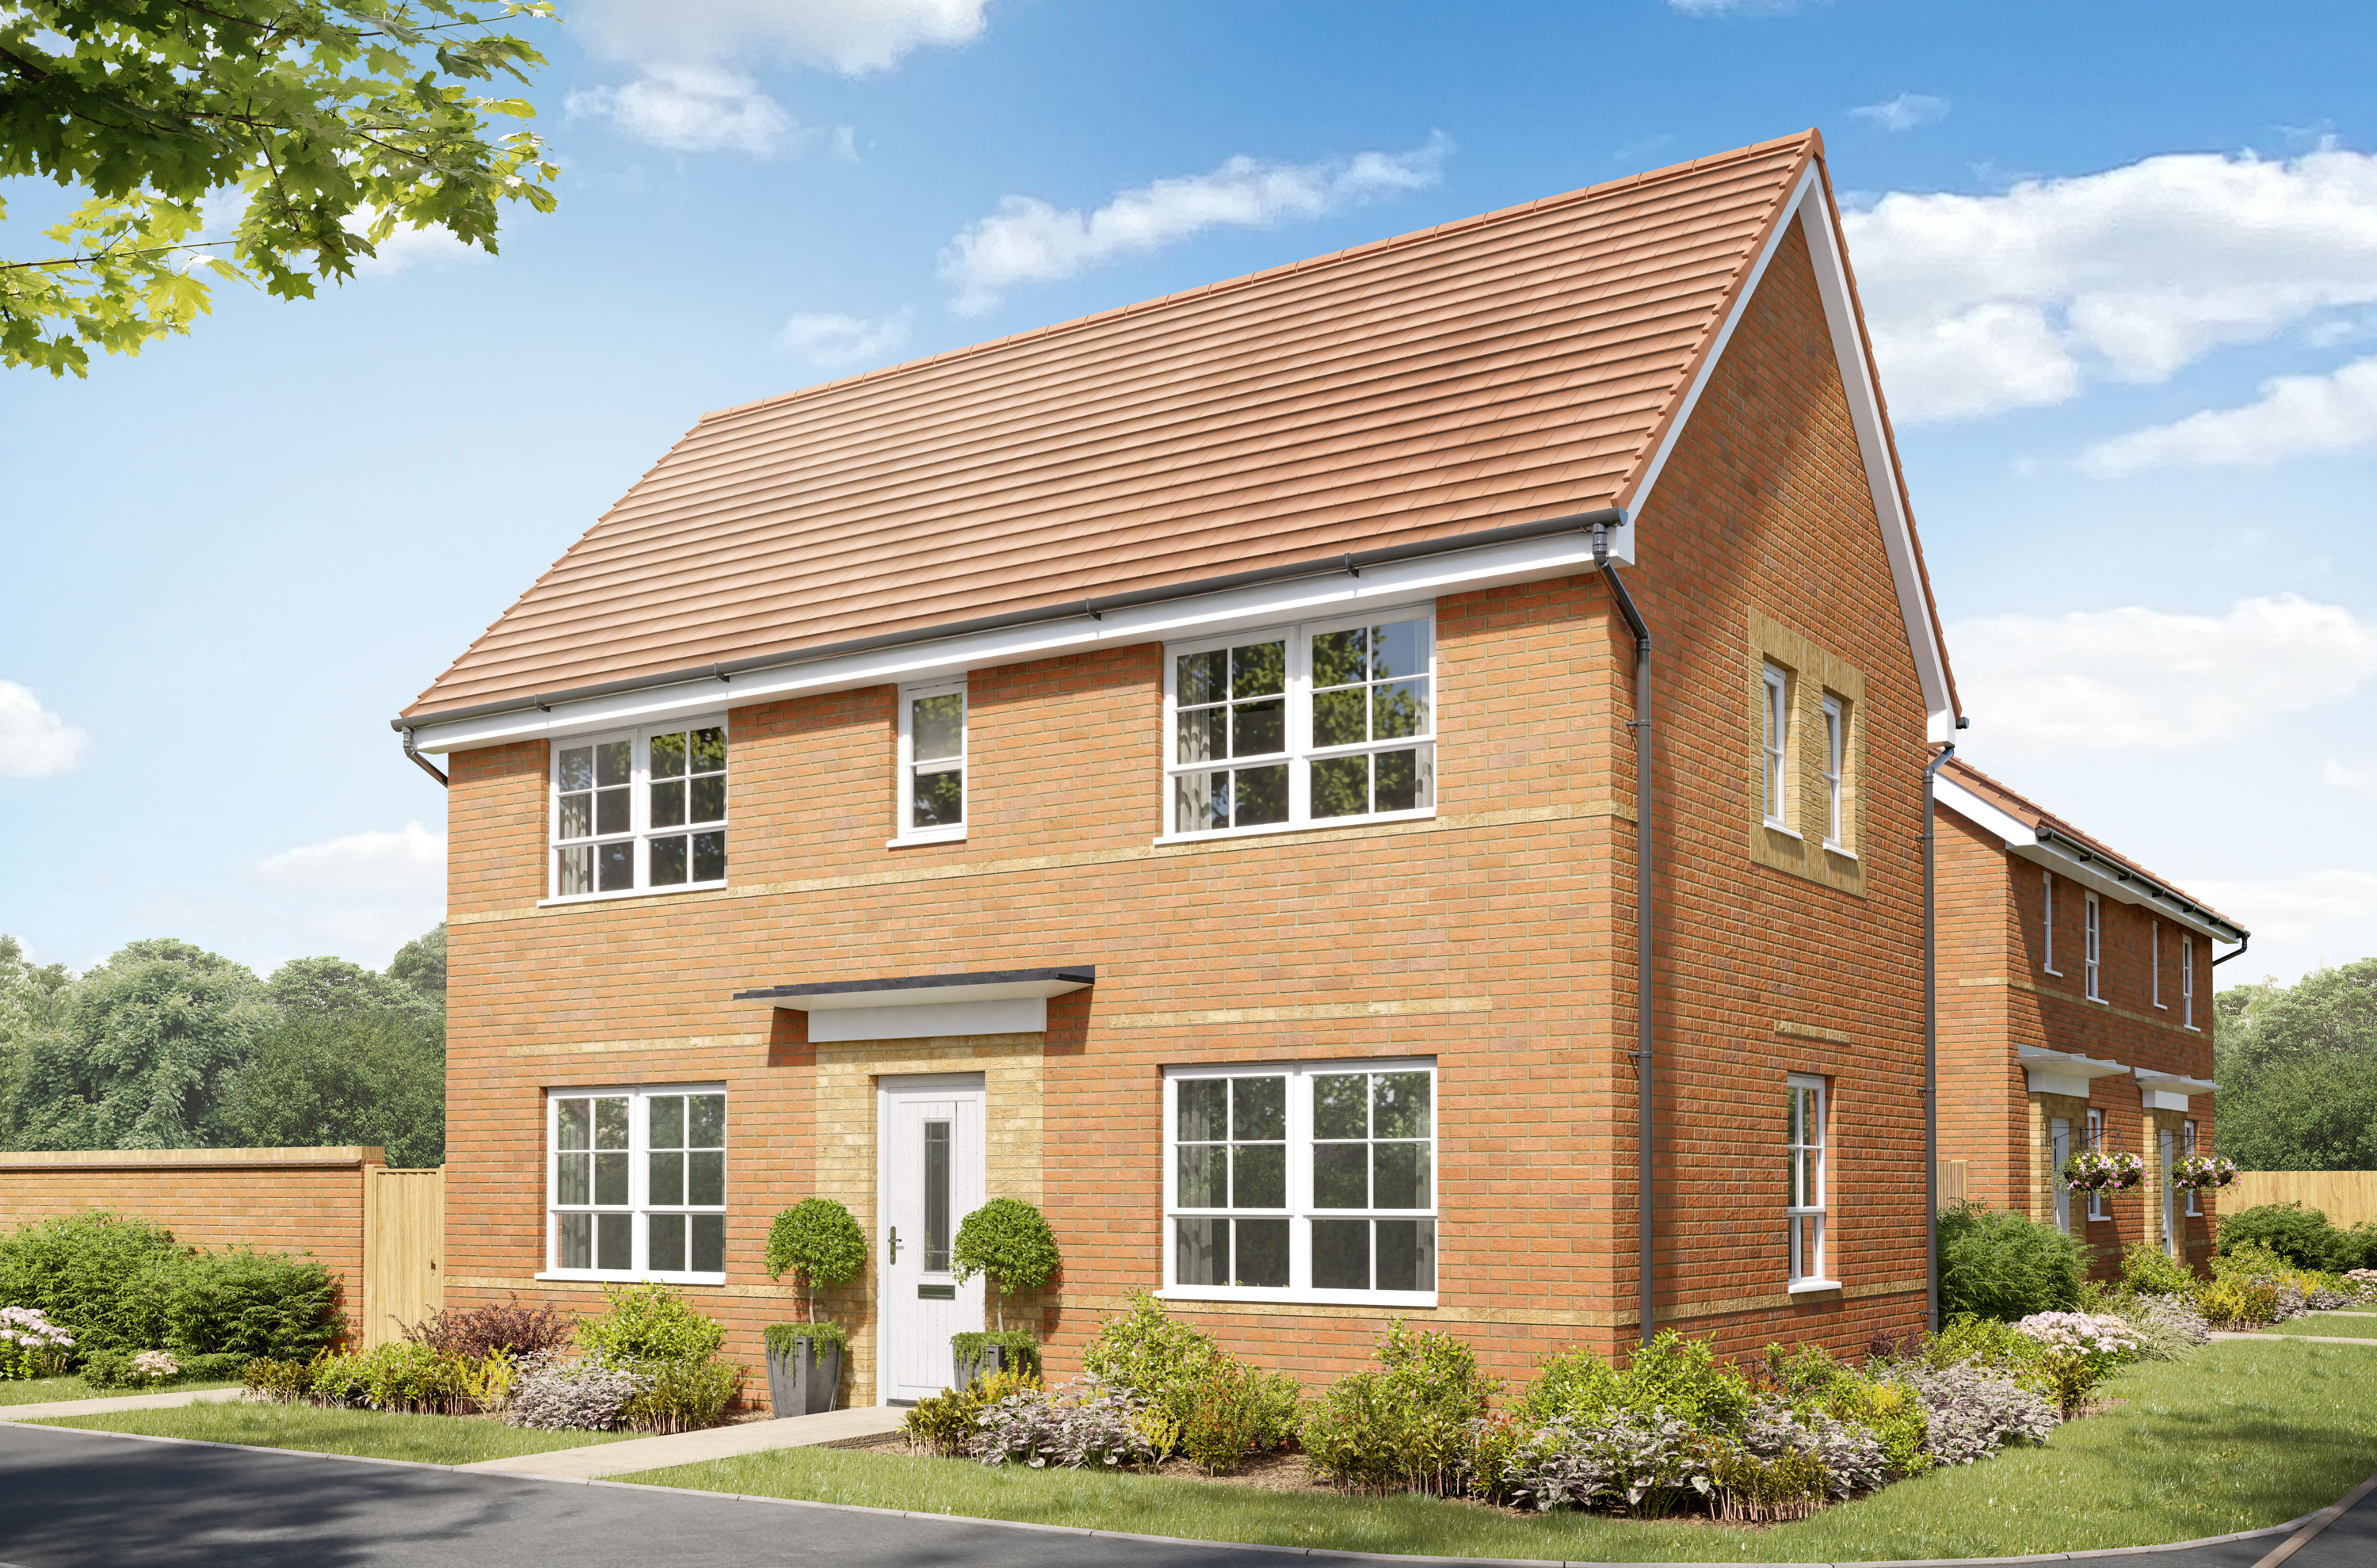 Property 1 of 9. Exterior CGI View Of Our 3 Bed Ennerdale Home